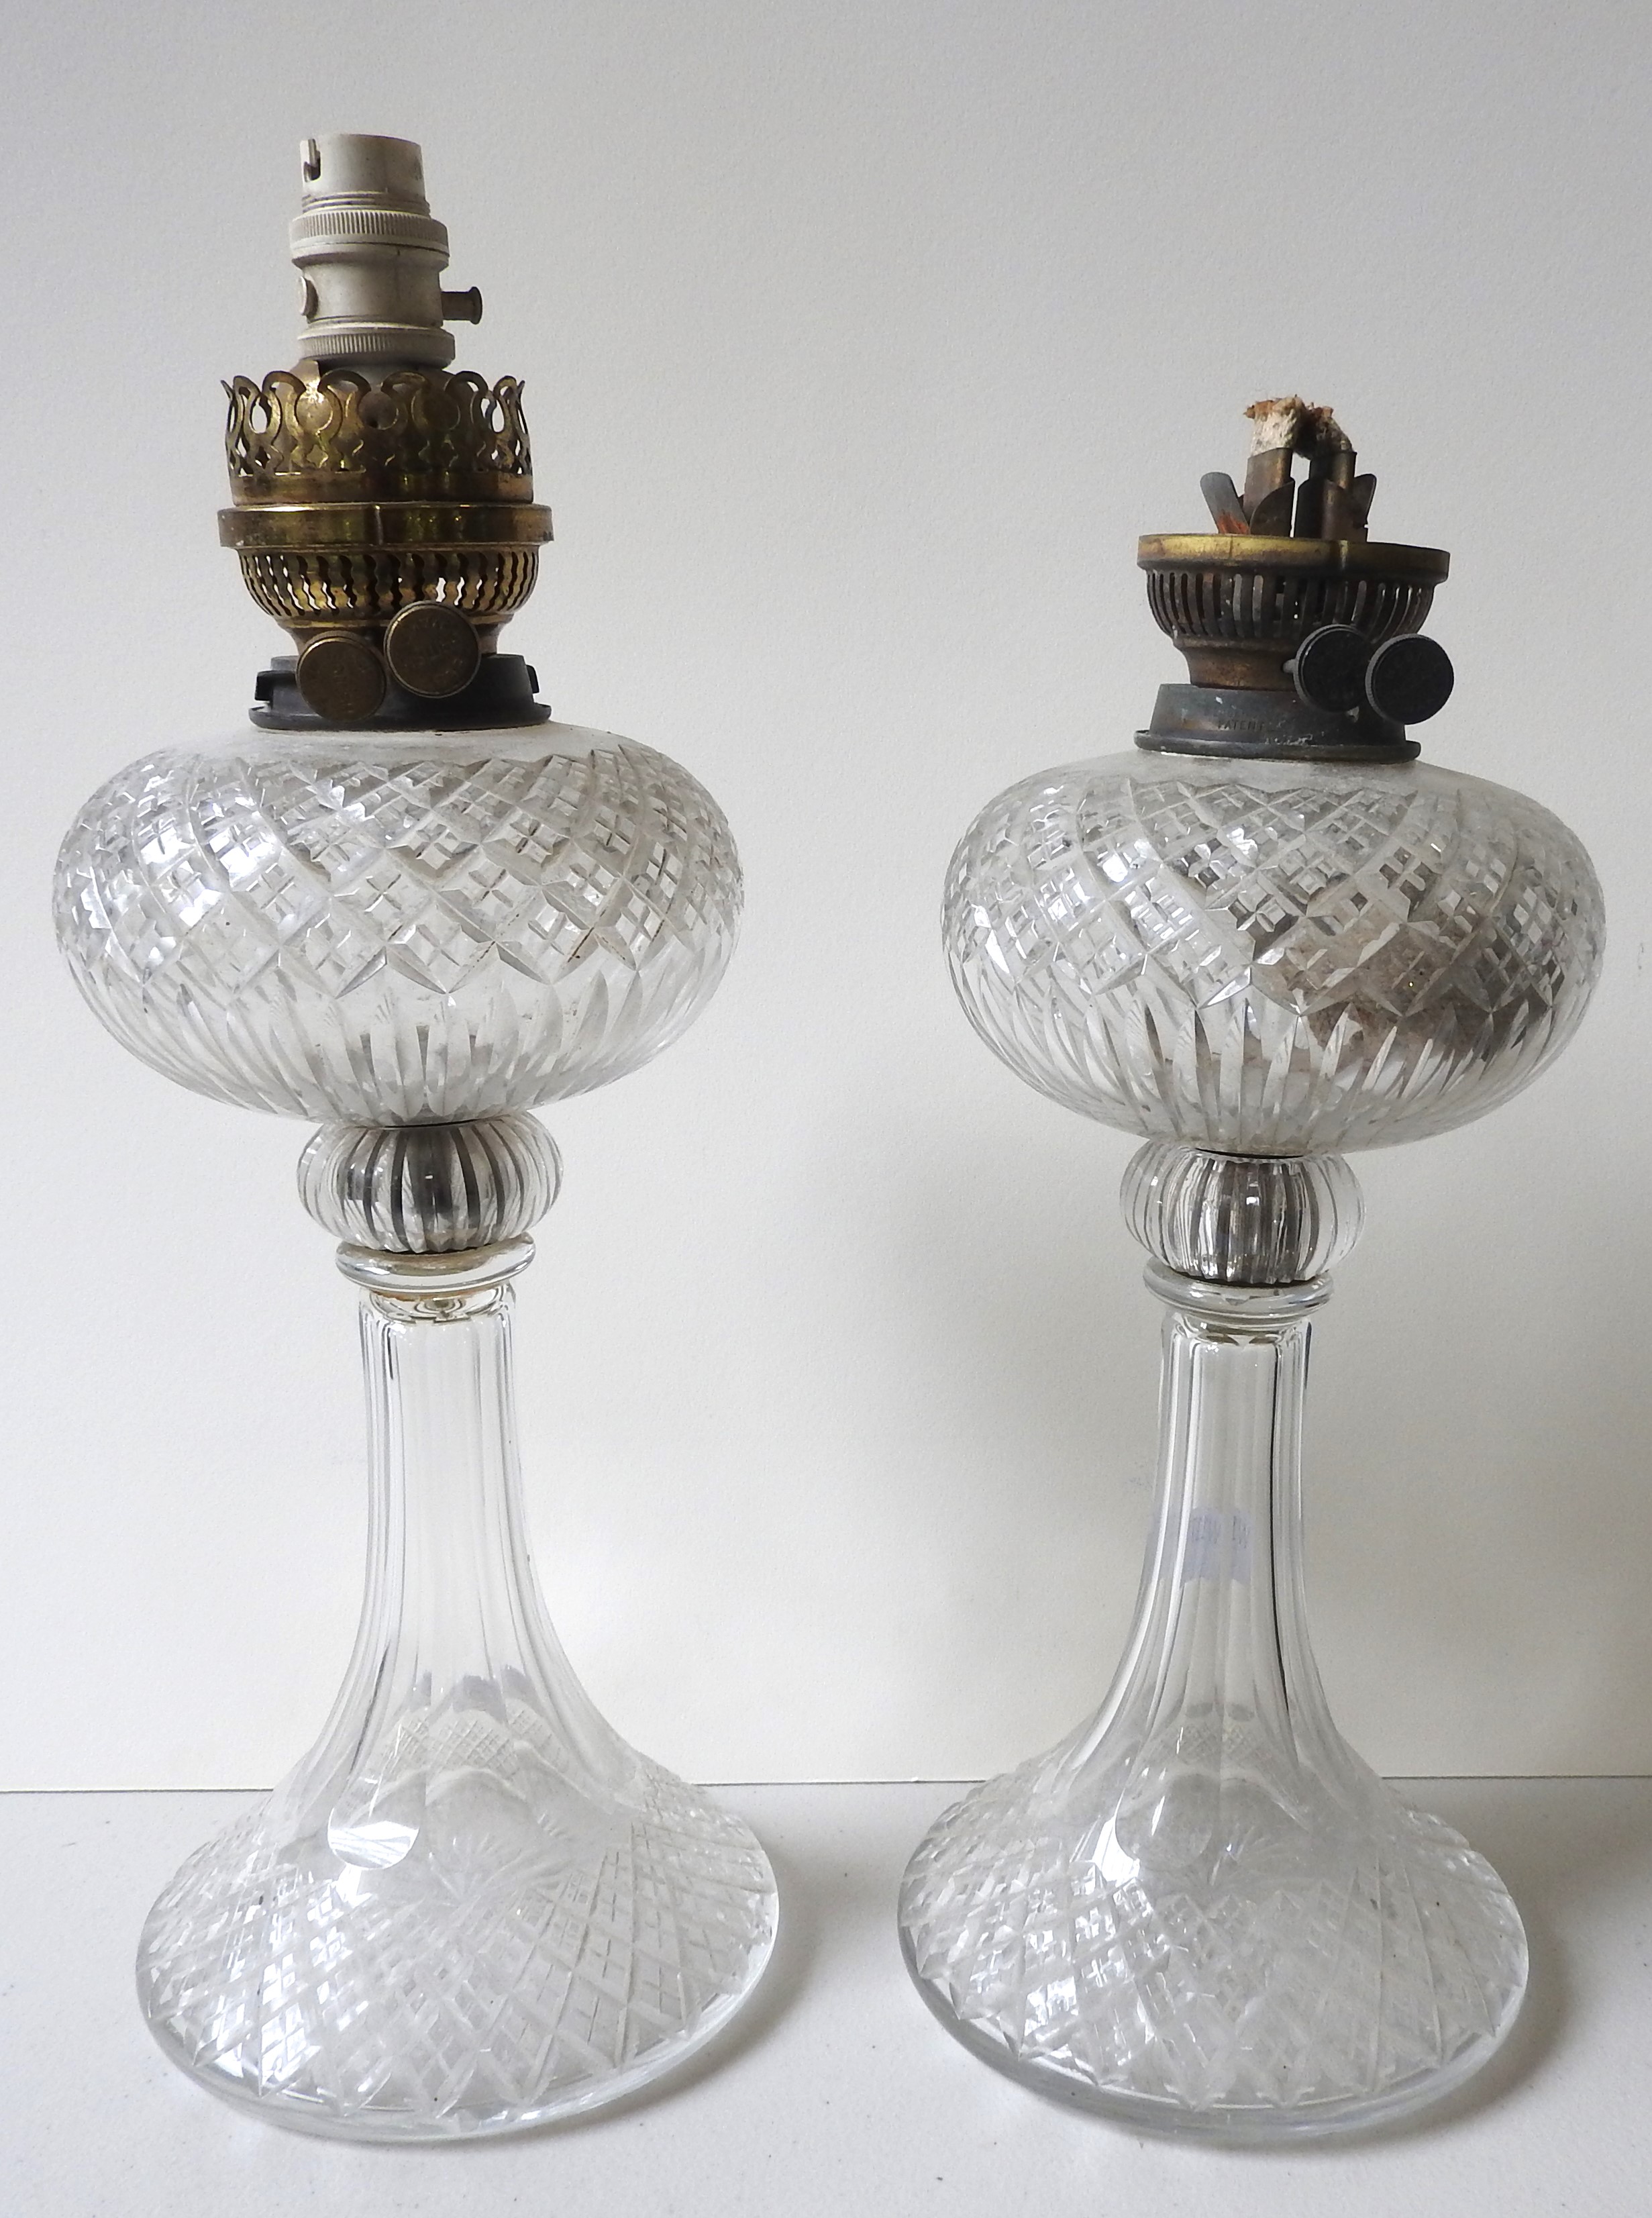 A PAIR OF CUT GLASS OIL LAMPS, early 20th century, with flared bases, the wick holders later changed